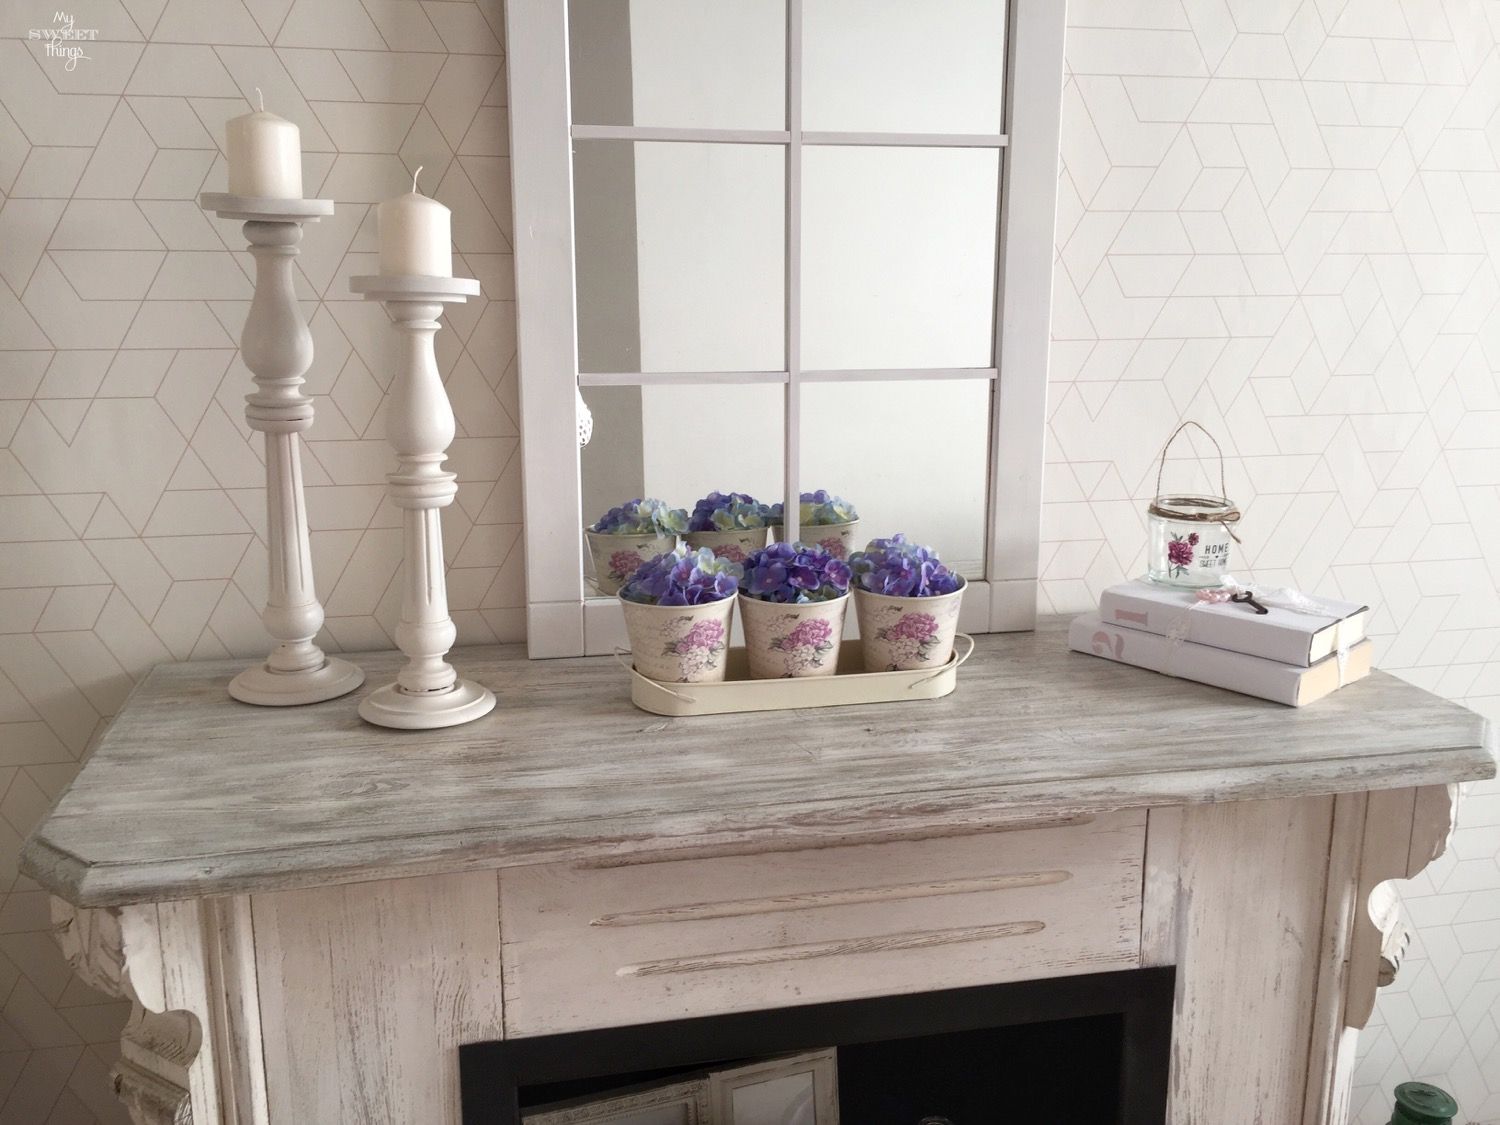 How to update an old wooden fireplace · Fireplace makeover · Via www.sweethings.net 